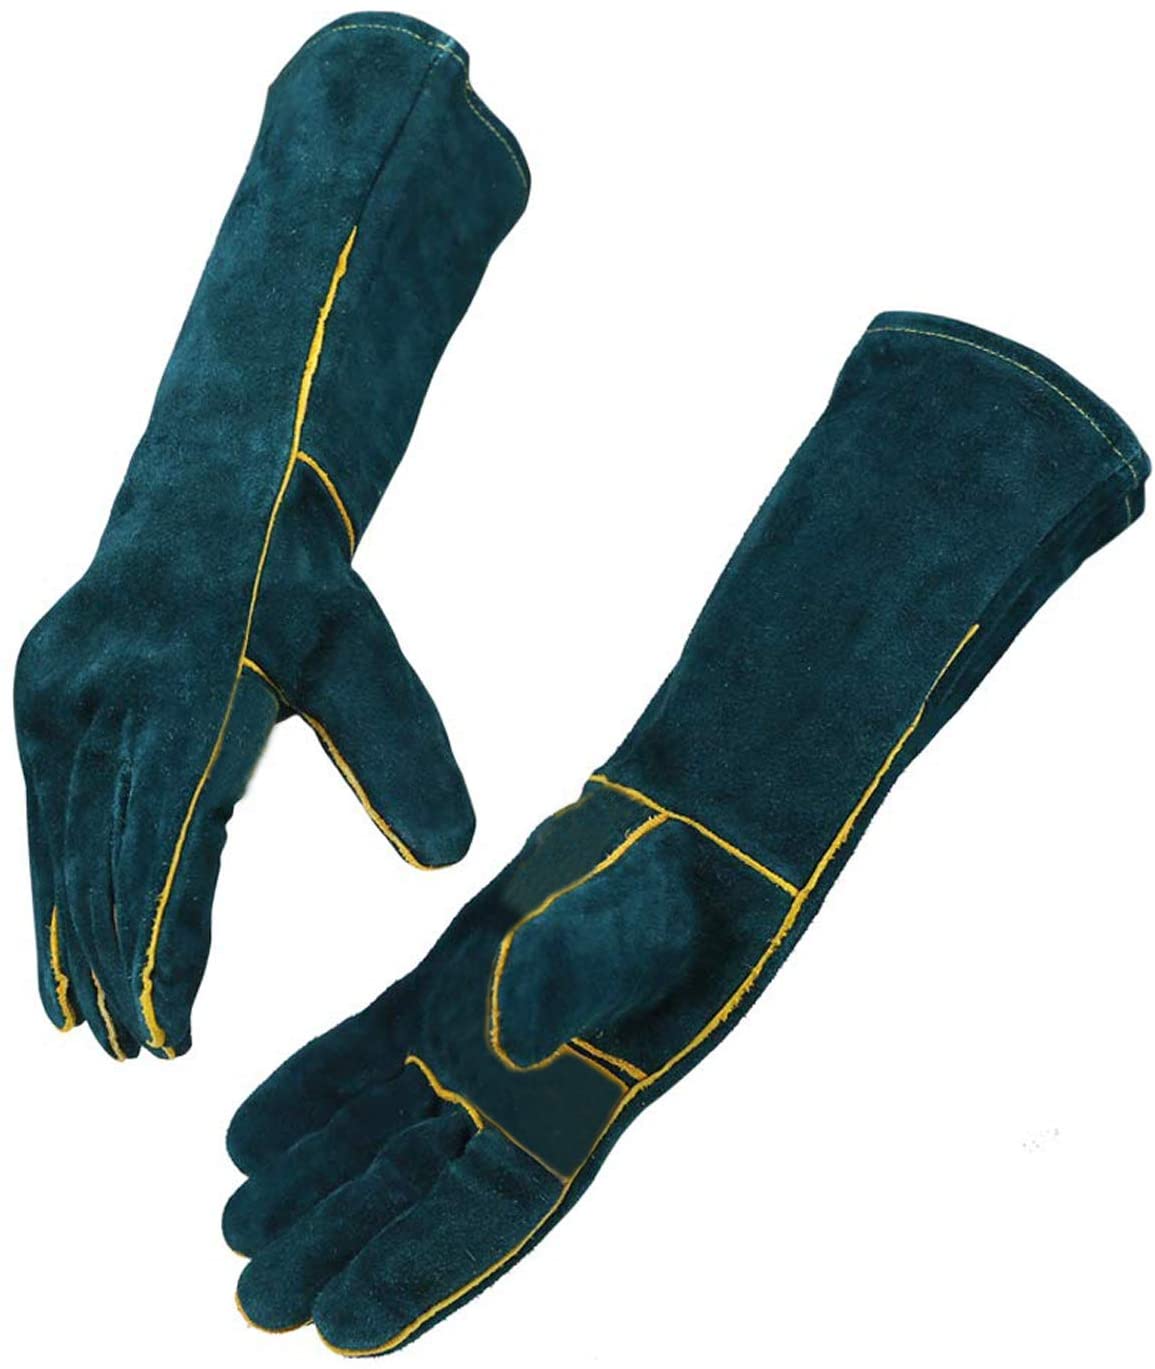 Read more about the article Best Snake Proof Gloves 2022